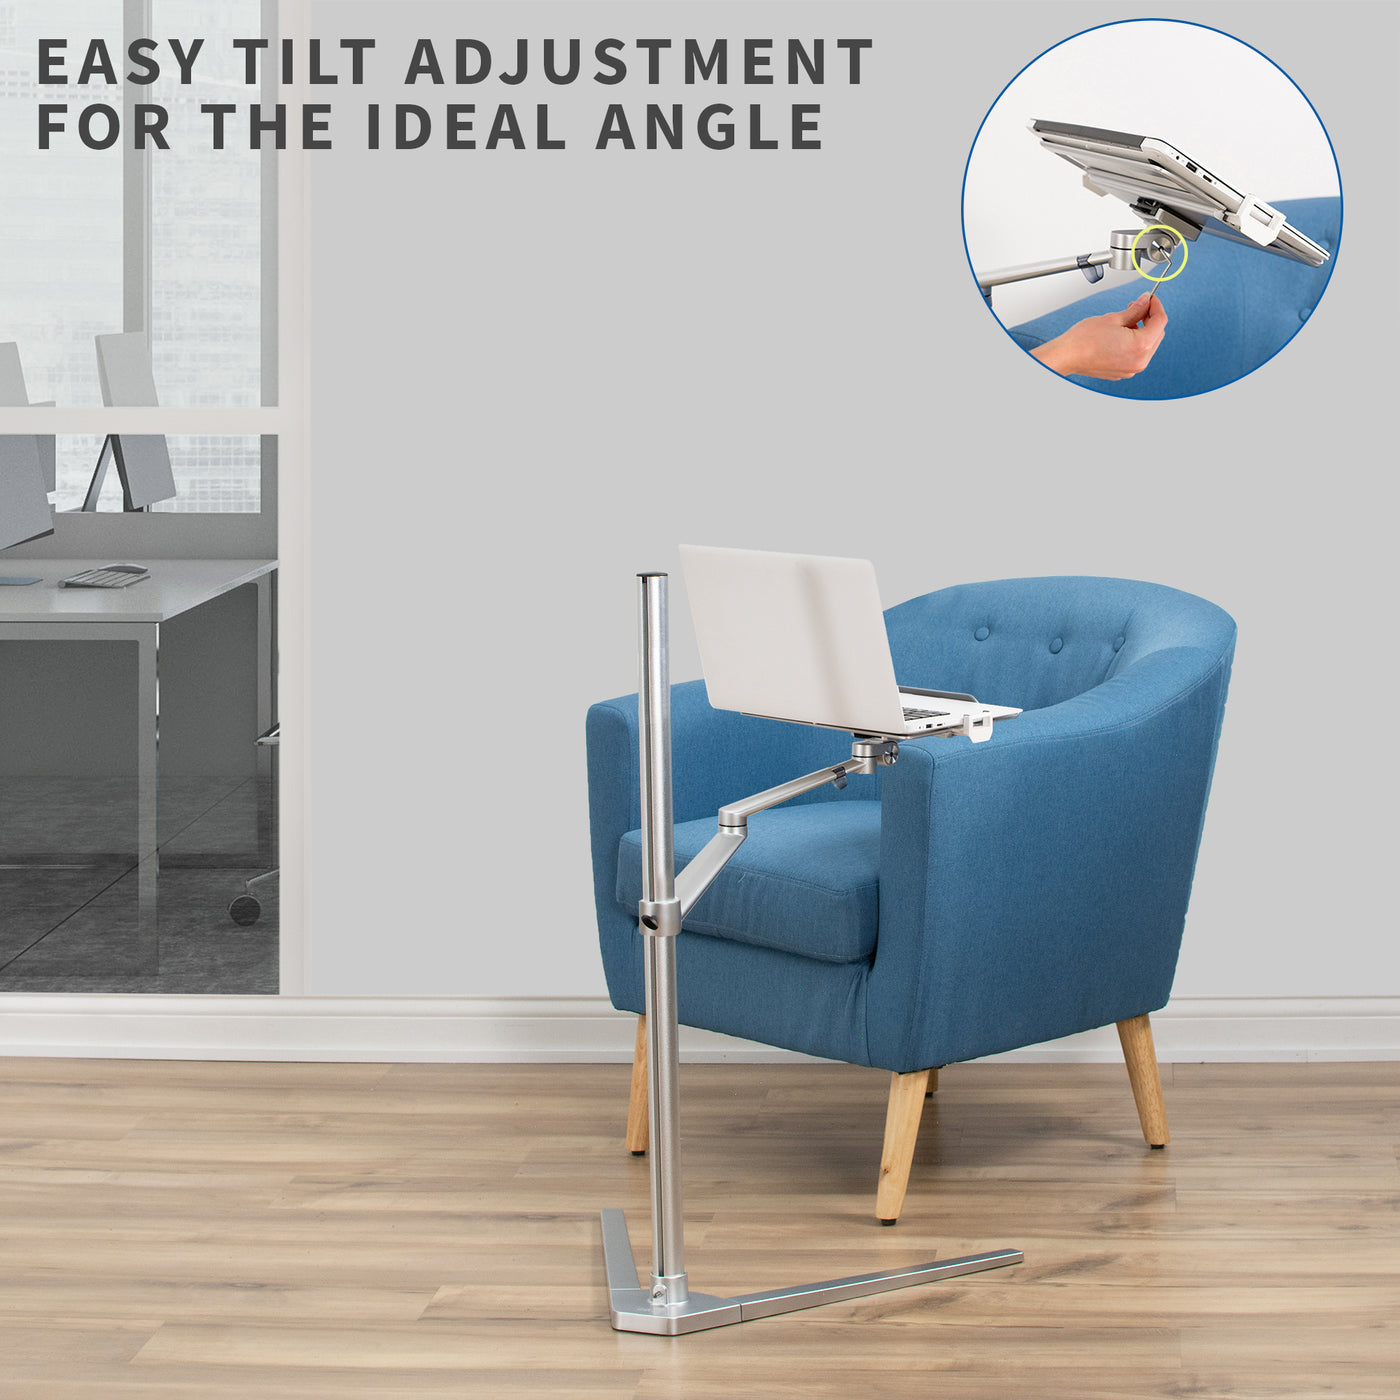 Tilt adjustment made easy with an Allen key for secure angles.